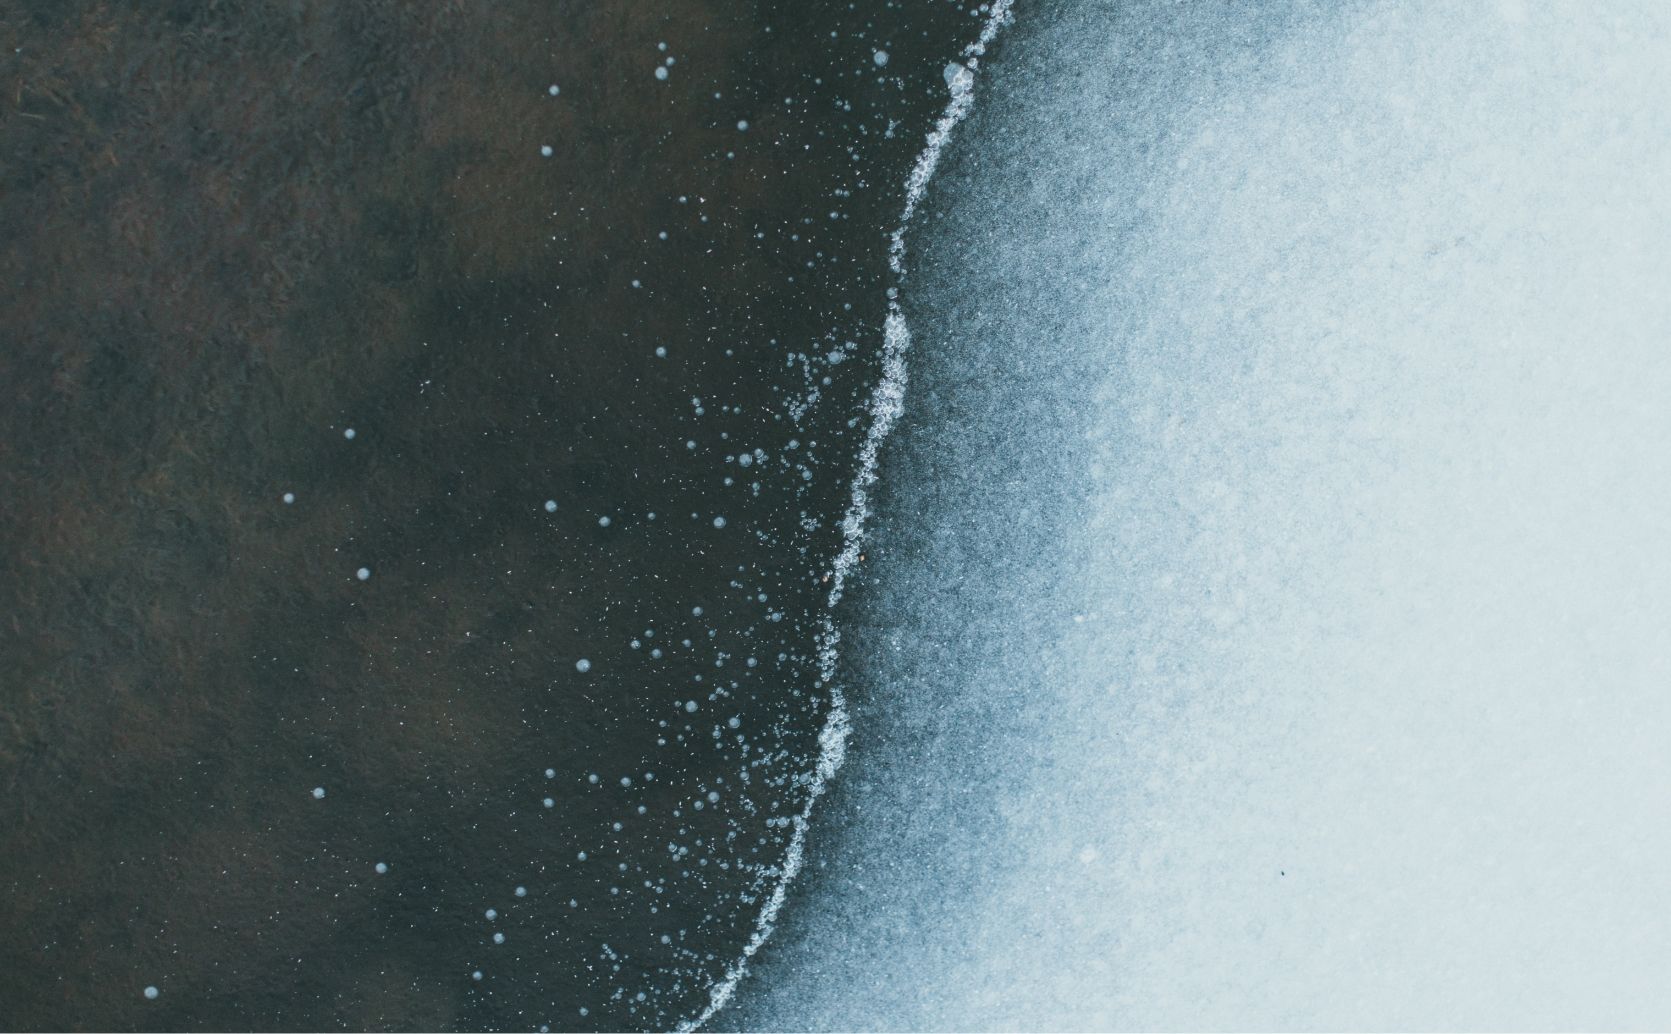 Abstract aerial photo of a body of water, half frosty and frozen, and half murky speckled with frozen air bubbles